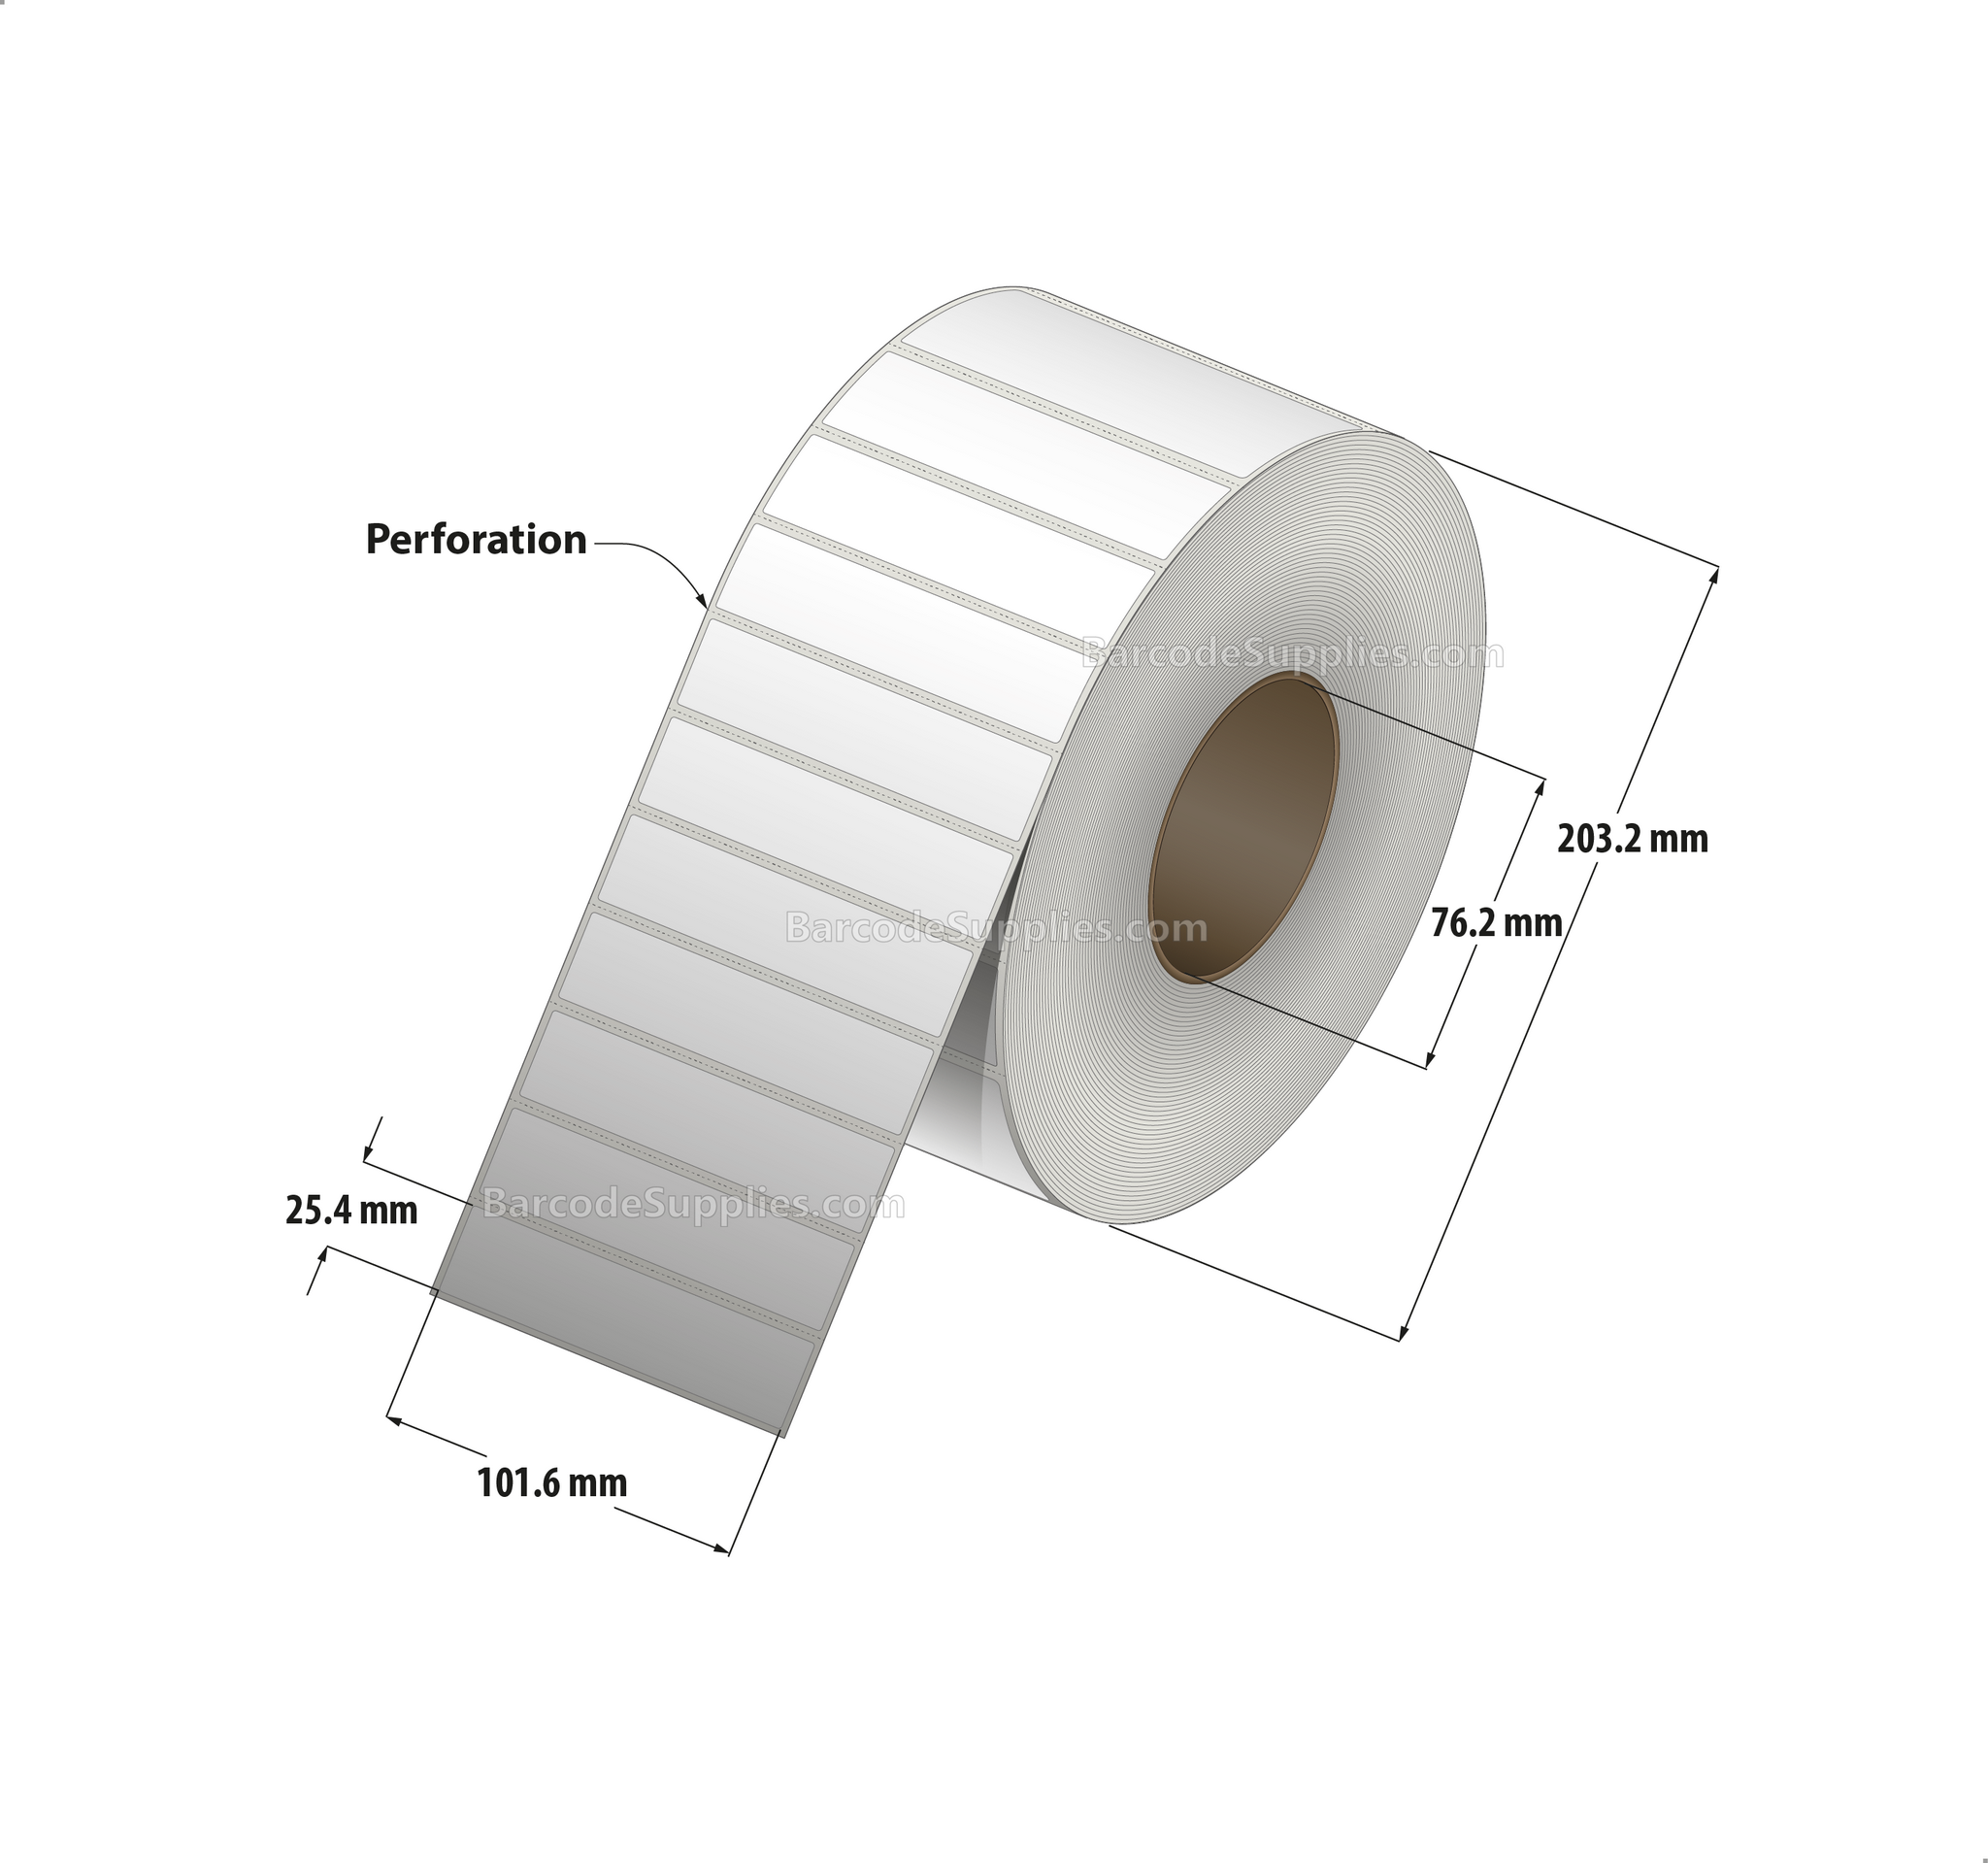 4 x 1 Direct Thermal White Labels With Acrylic Adhesive - Perforated - 5500 Labels Per Roll - Carton Of 4 Rolls - 22000 Labels Total - MPN: RD-4-1-5500-3 - BarcodeSource, Inc.